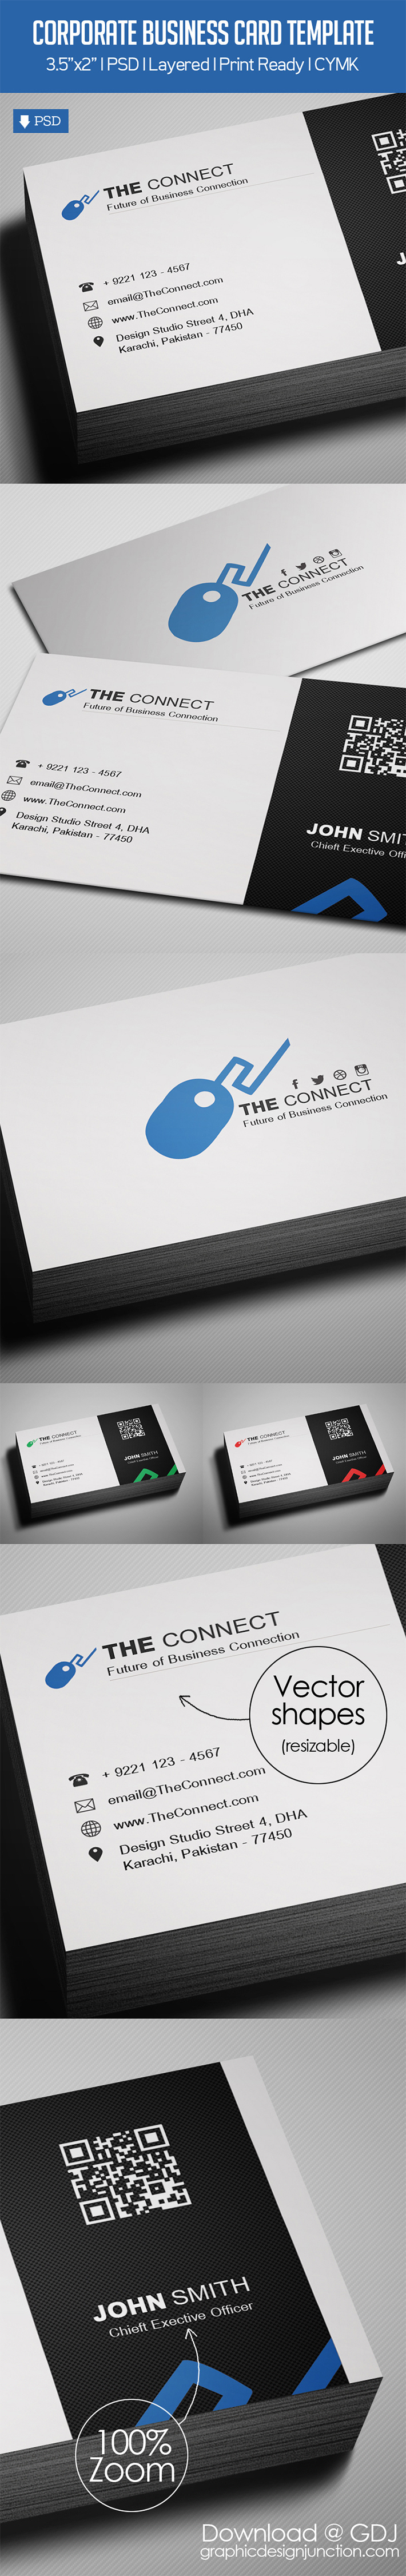 Awesome & Stylish Business Card Template